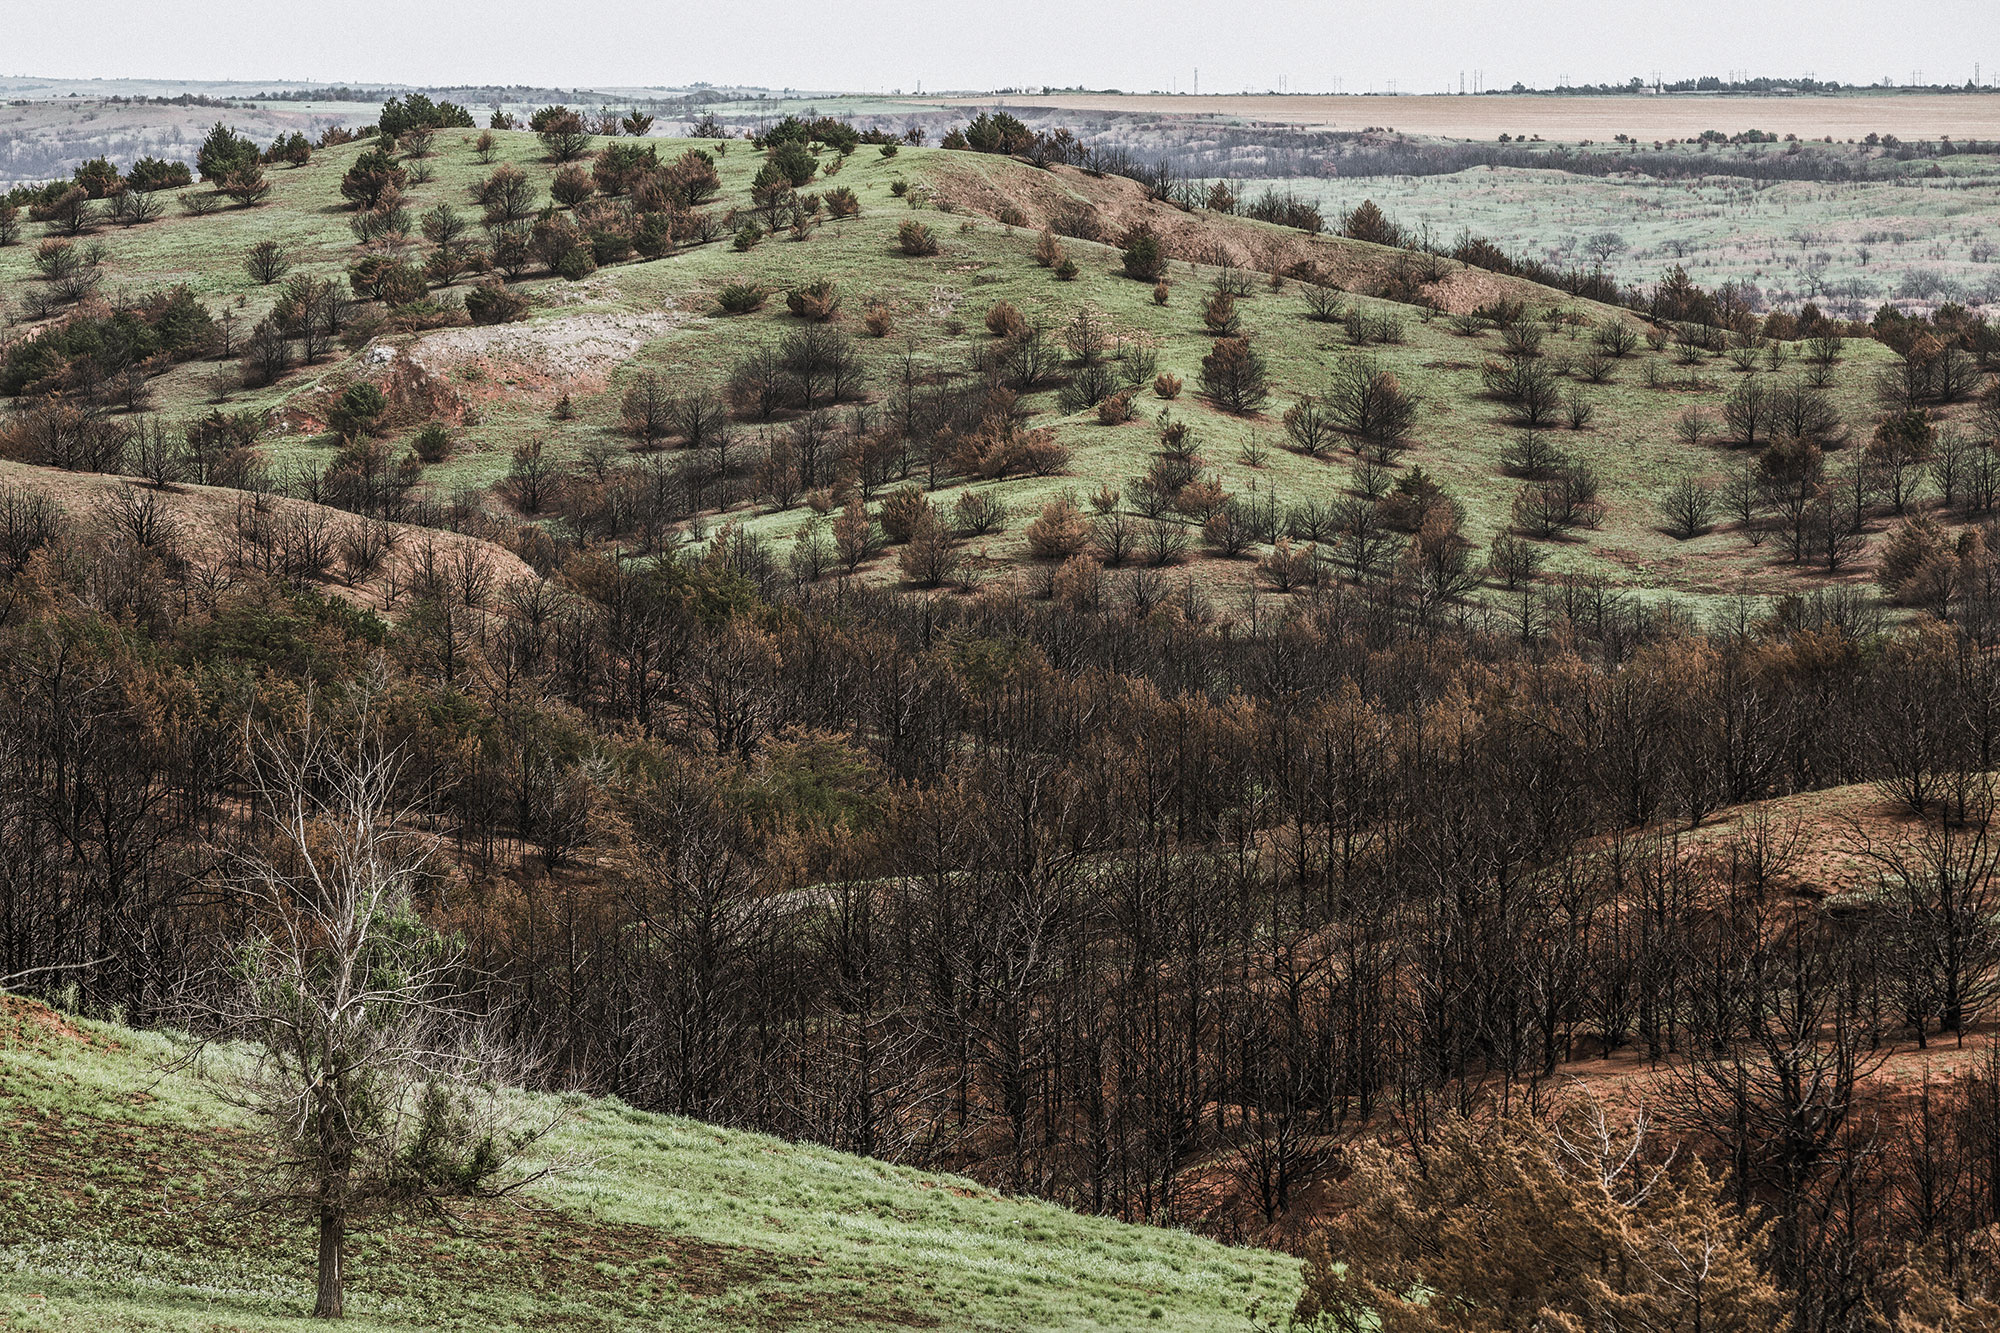 Area damaged by the fire slowly recovers.